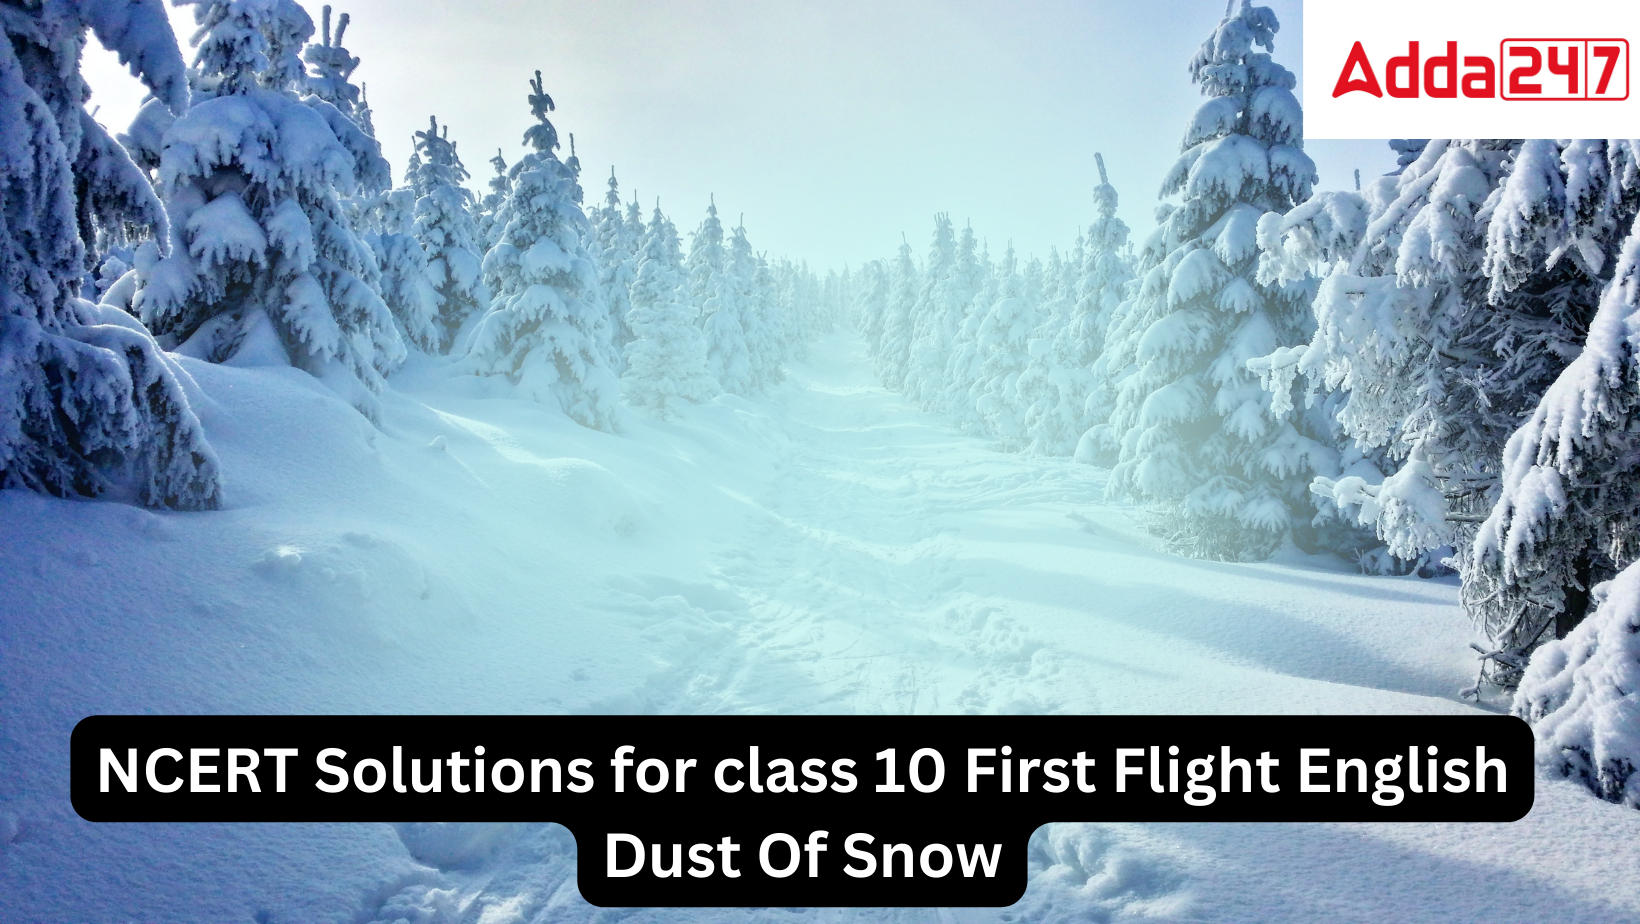 NCERT Solutions for class 10 First Flight English Dust Of Snow